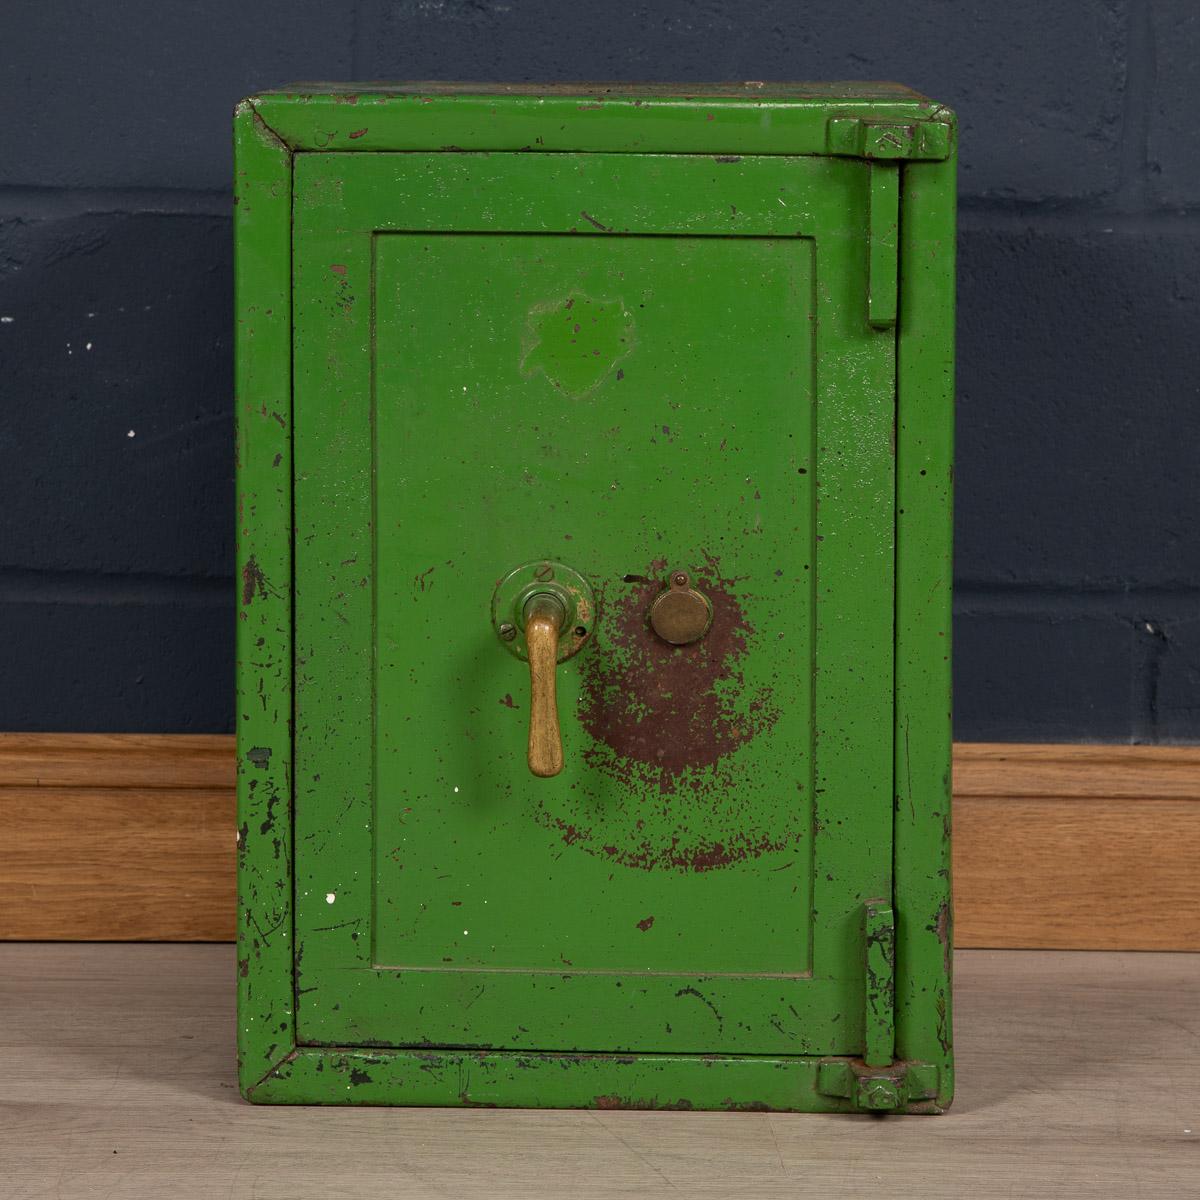 A lovey cast iron fire proof safe in good working order. Complete with its key, it is as fit for purpose today as it was the day it was made. Showing great patina, these safes now make lovely side tables in an Industrial style interior or as a